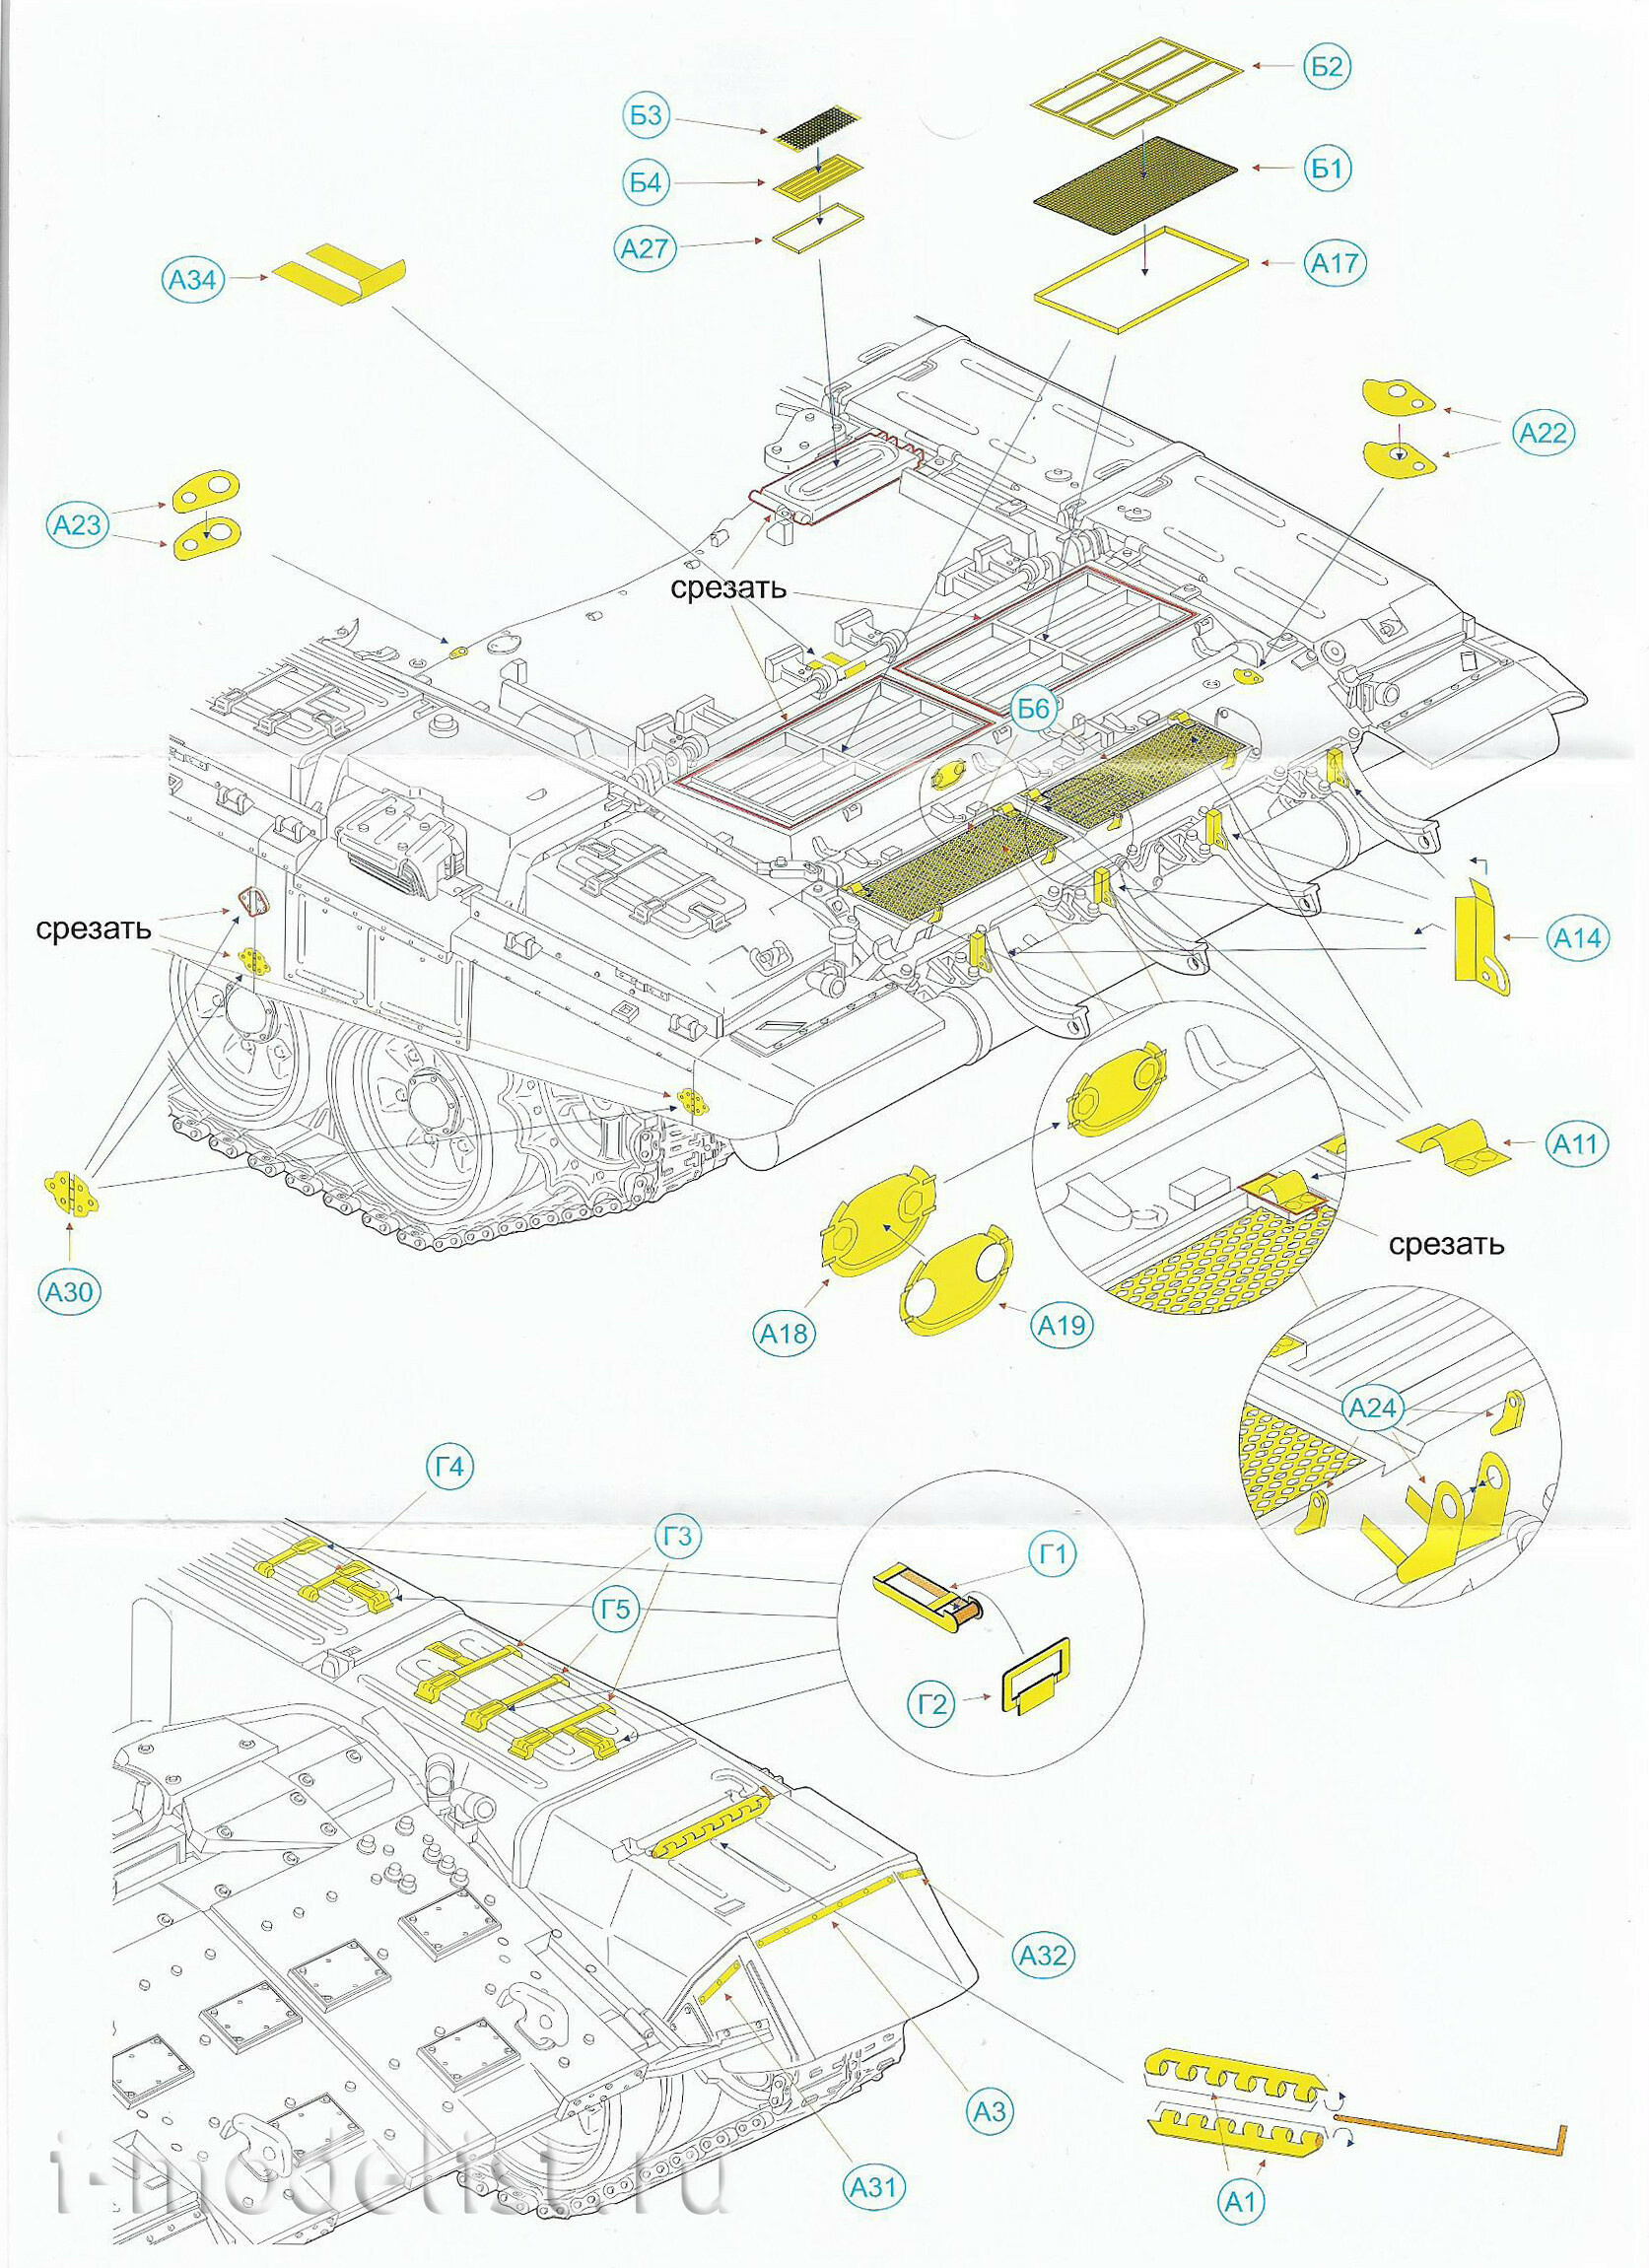 035204 Microdesign 1/35 Kit of photo-etched parts for tank 90 (Base set)